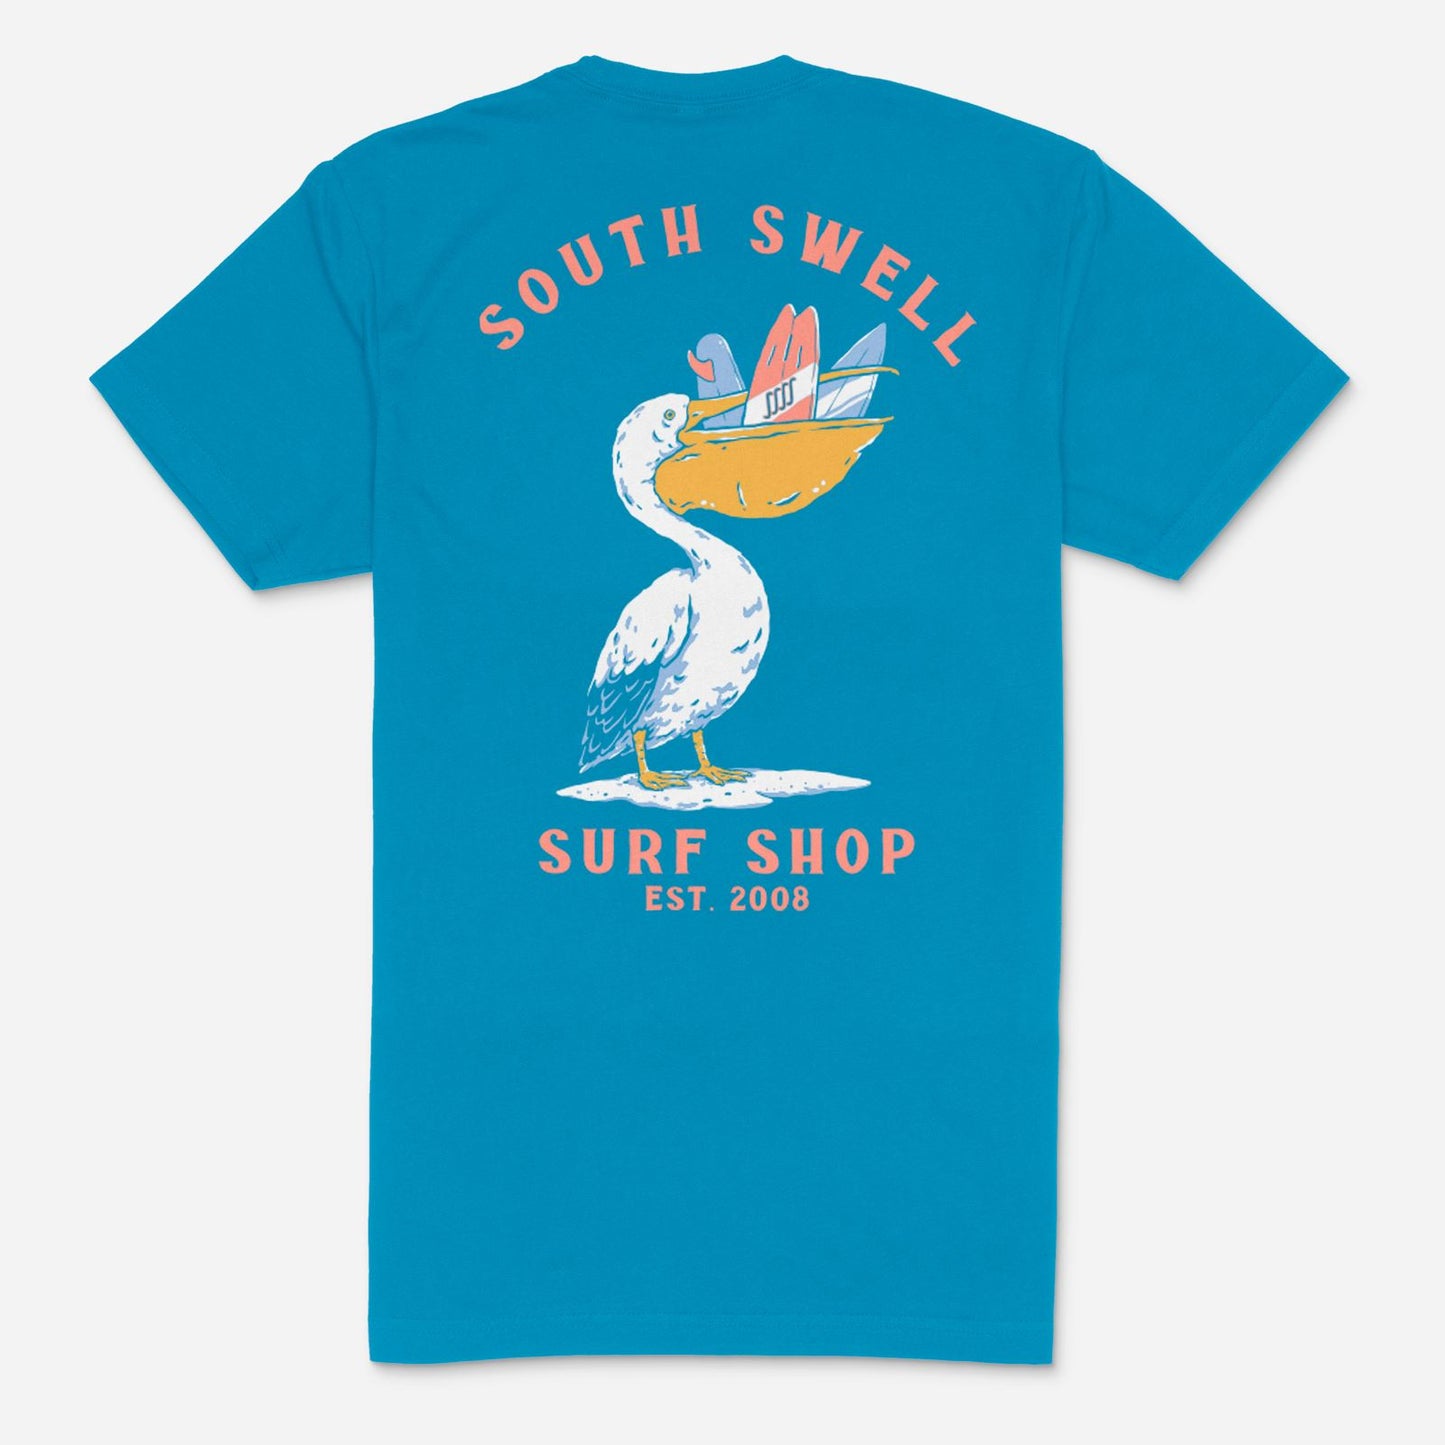 South Swell Dirty Bird Tee M Tees SOUTH SWELL Electric Blue S 